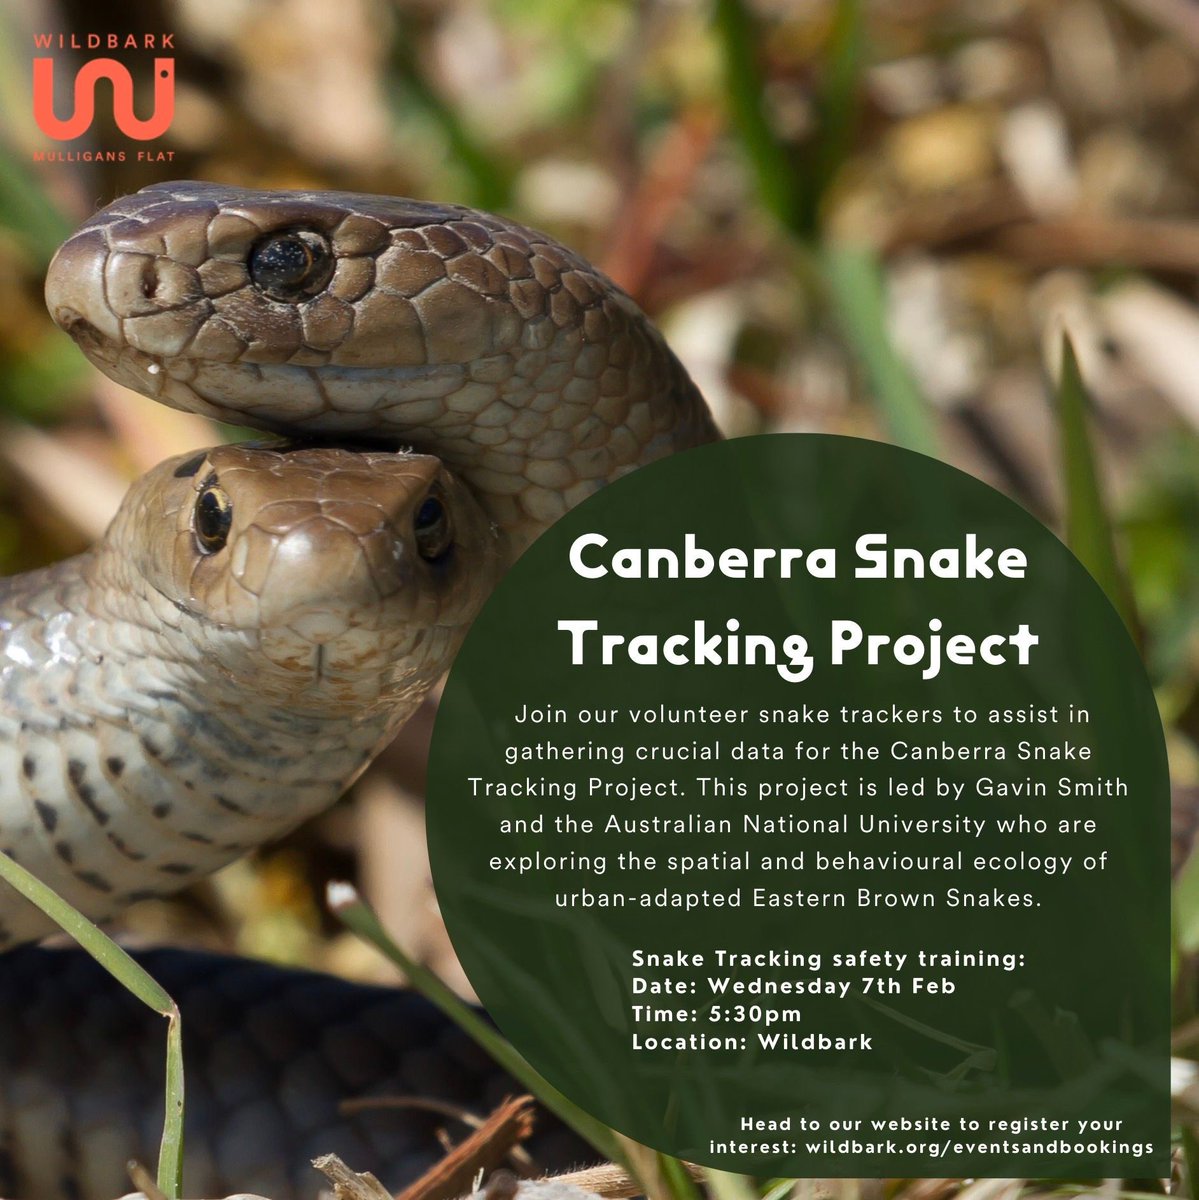 People of Canberra. Learn how to track brown snakes. Contribute to our scientific study of their spatial ecology. Make some time & come along to this info session on Wed 7 Feb, I guarantee you won’t regret it. Opprtunities to do real science don’t come around often. #WildOz